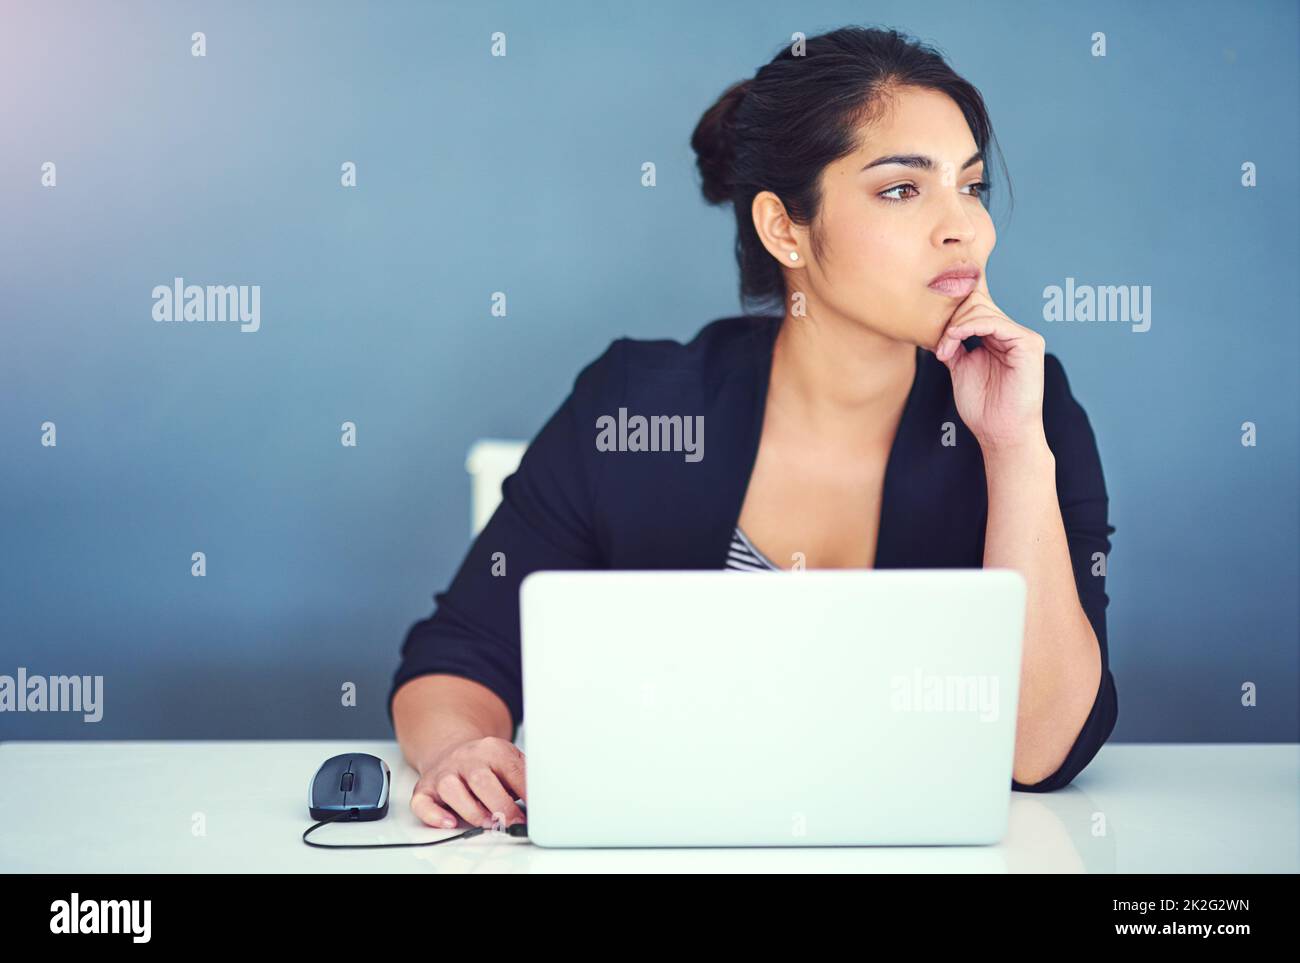 Just another day at the office. Cropped shot of a young businesswoman looking distracted at her desk. Stock Photo